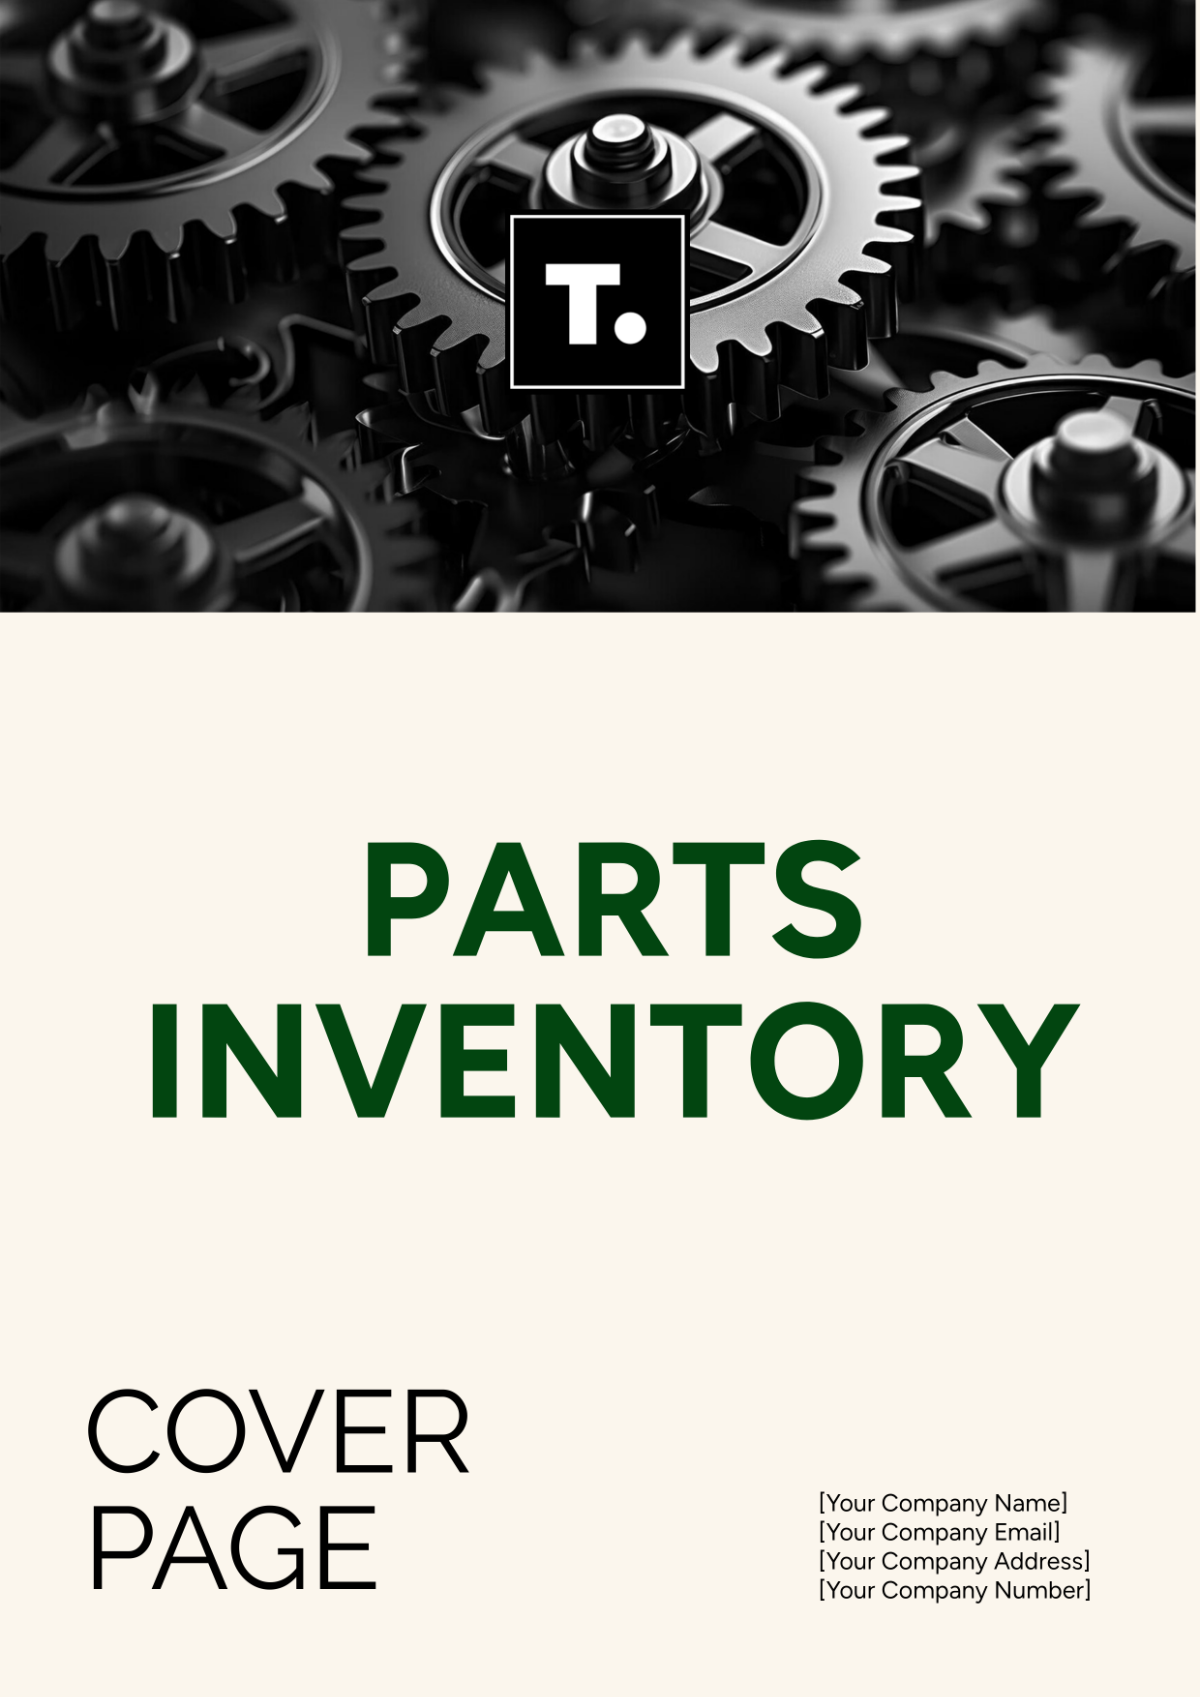 Parts Inventory Cover Page